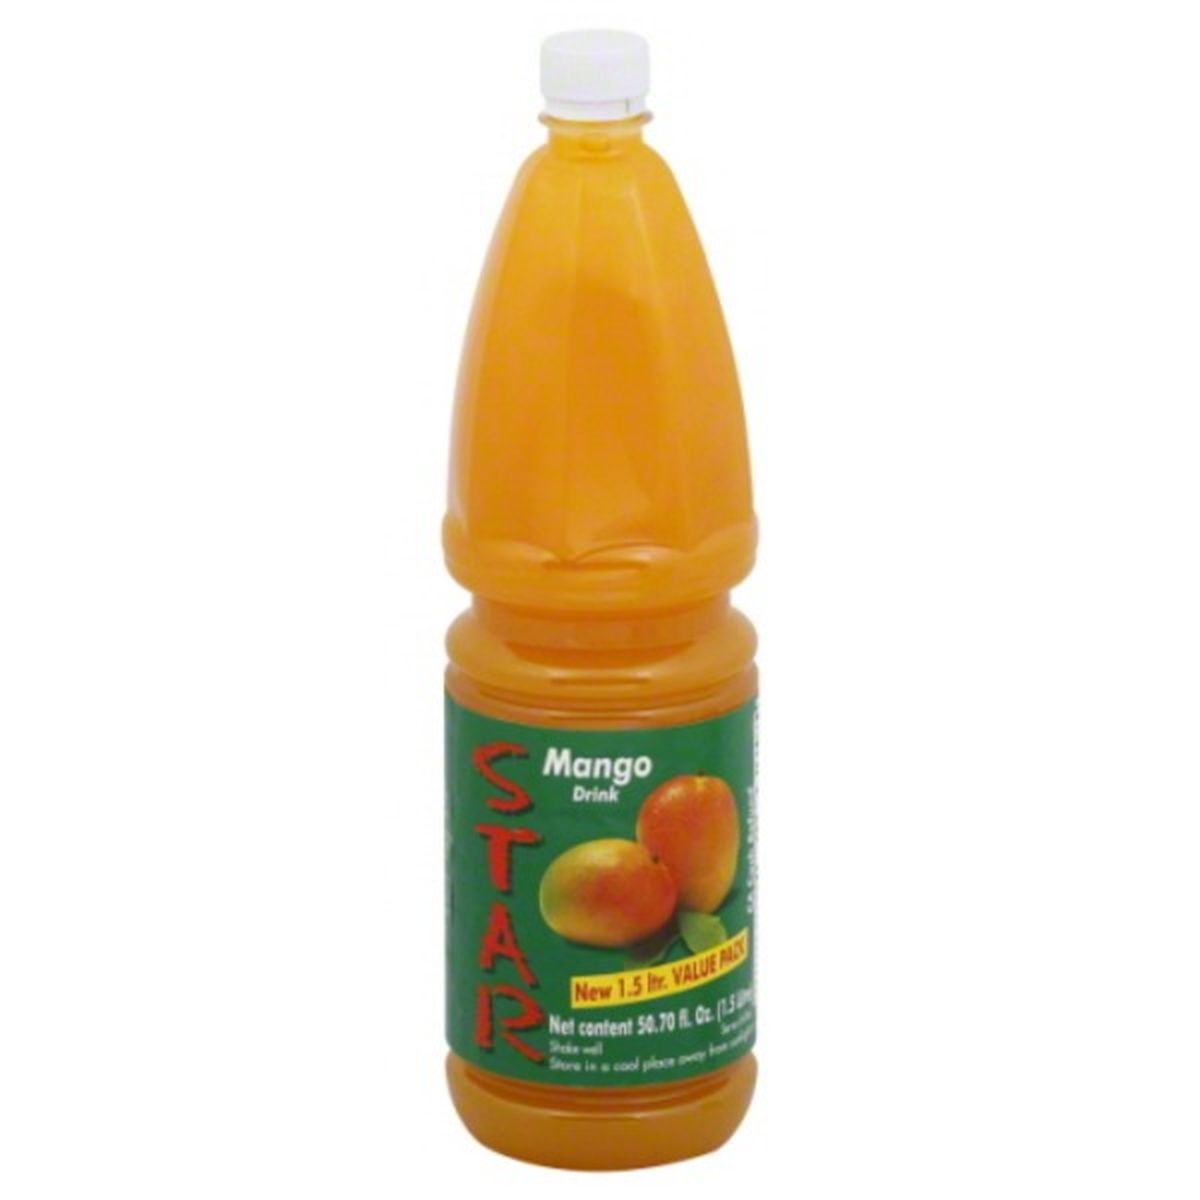 Calories in Star Drink, Mango, Value Pack